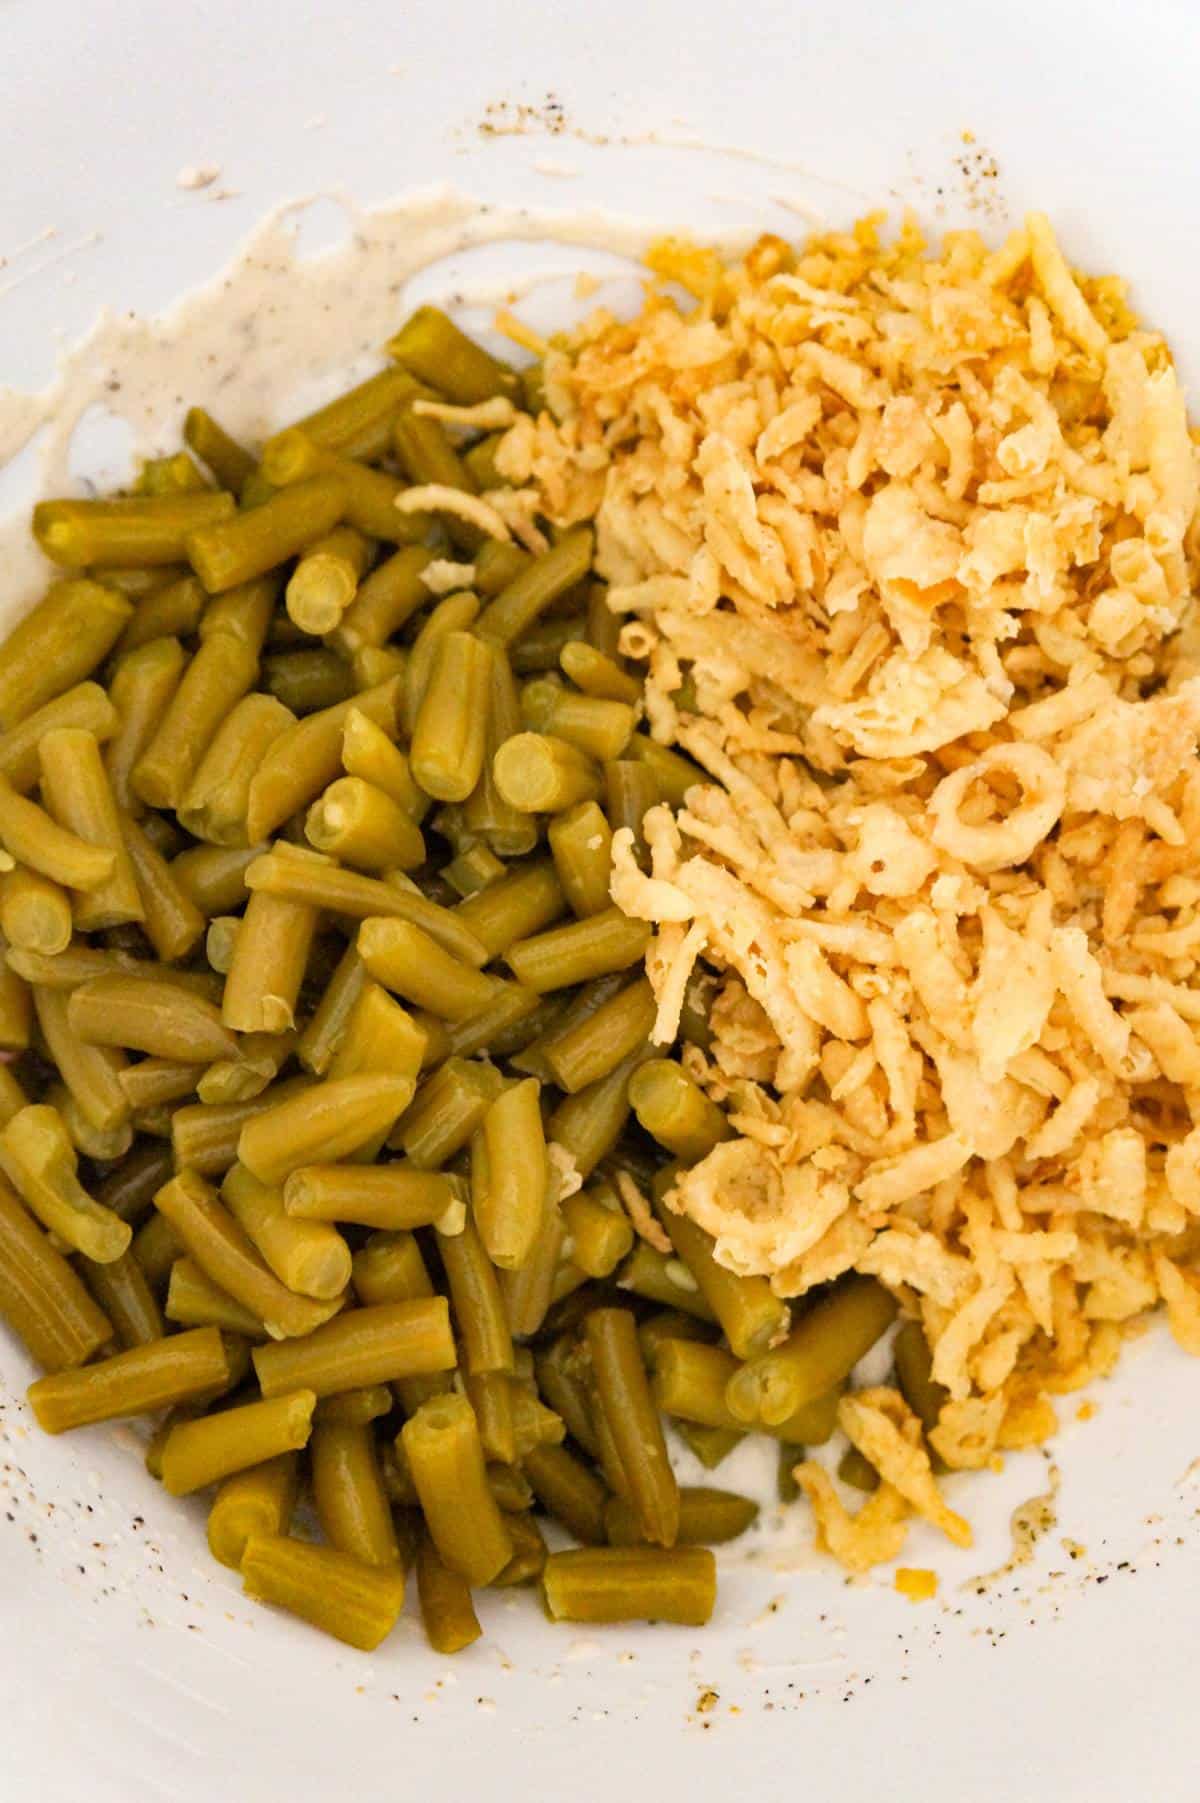 green beans and French's fried onions in a mixing bowl